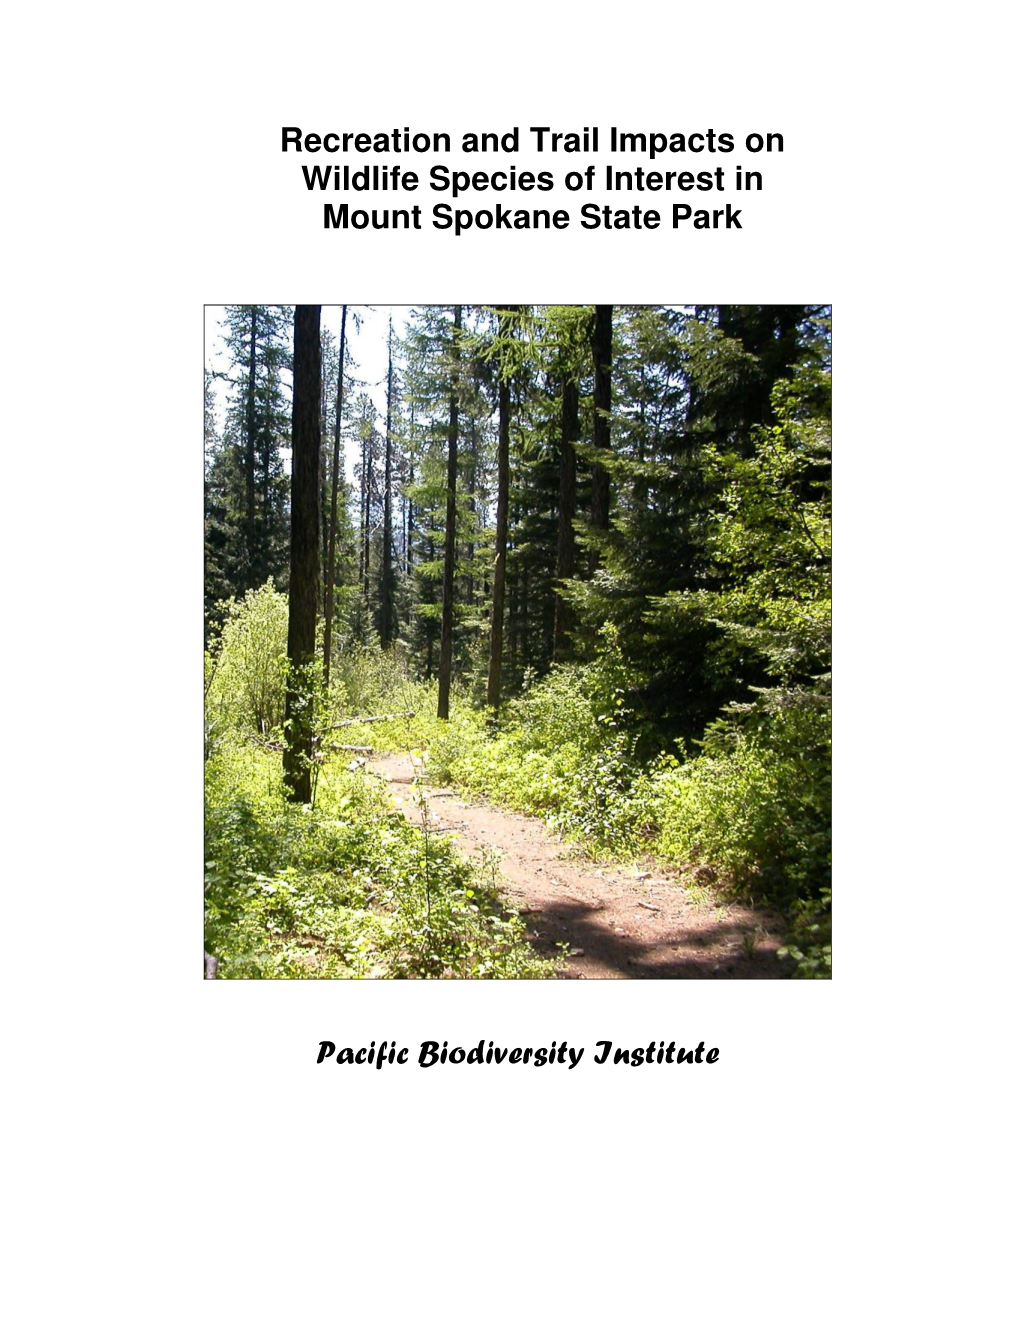 Recreation and Trail Impacts on Wildlife Species of Interest in Mount Spokane State Park